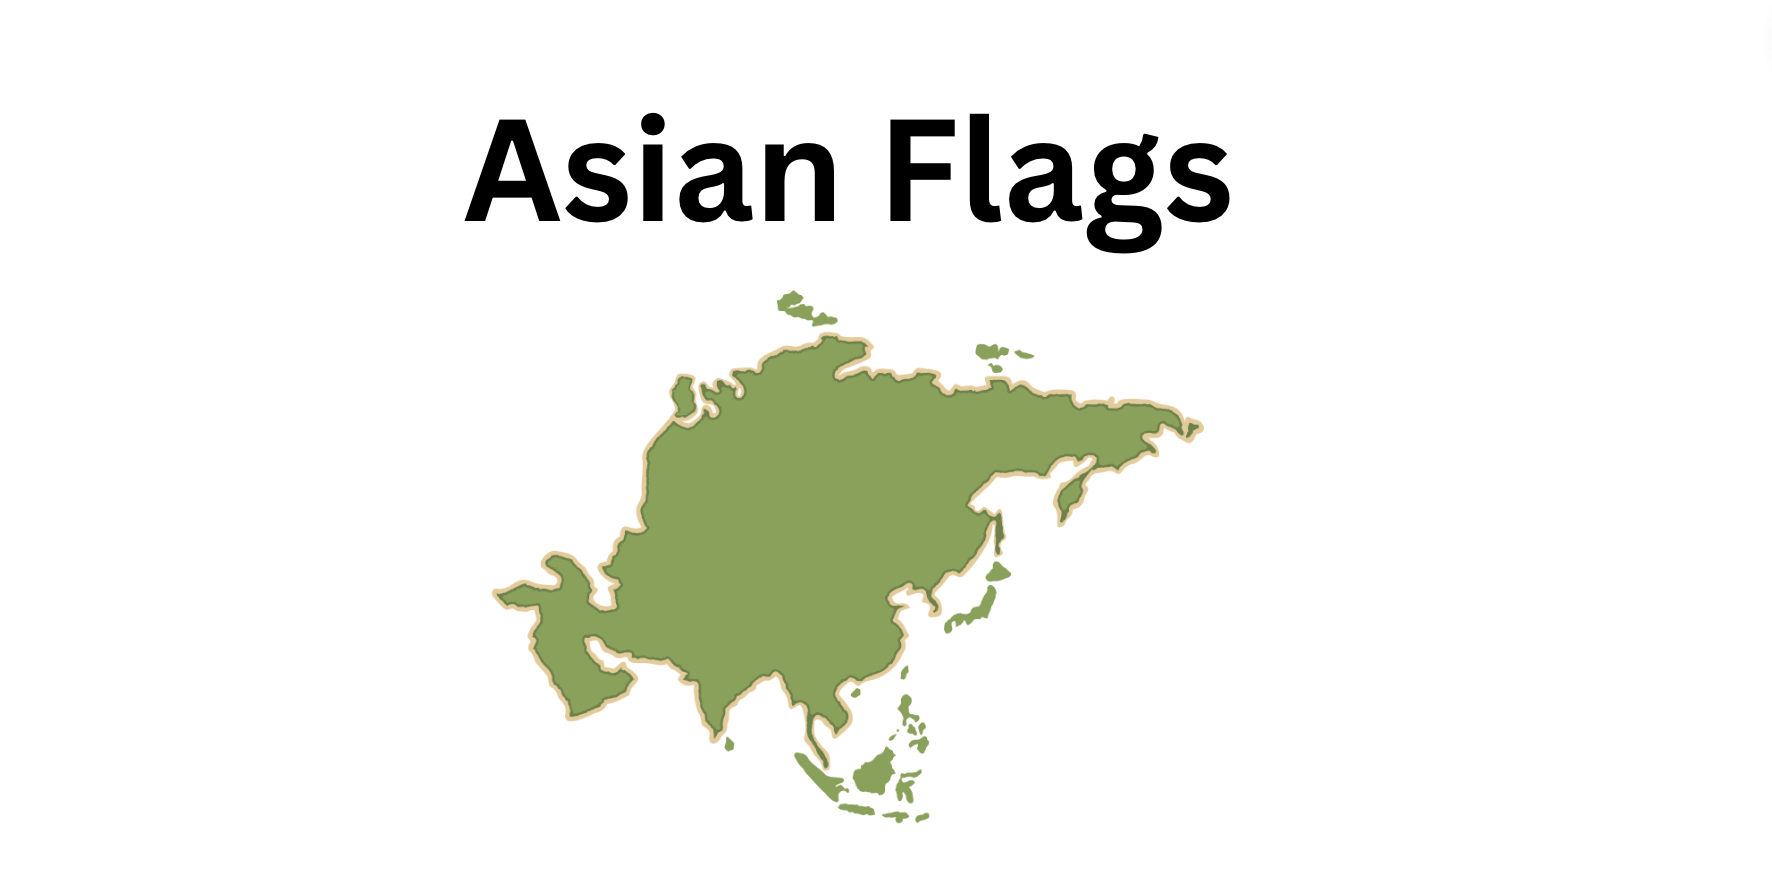 Asian Flags done